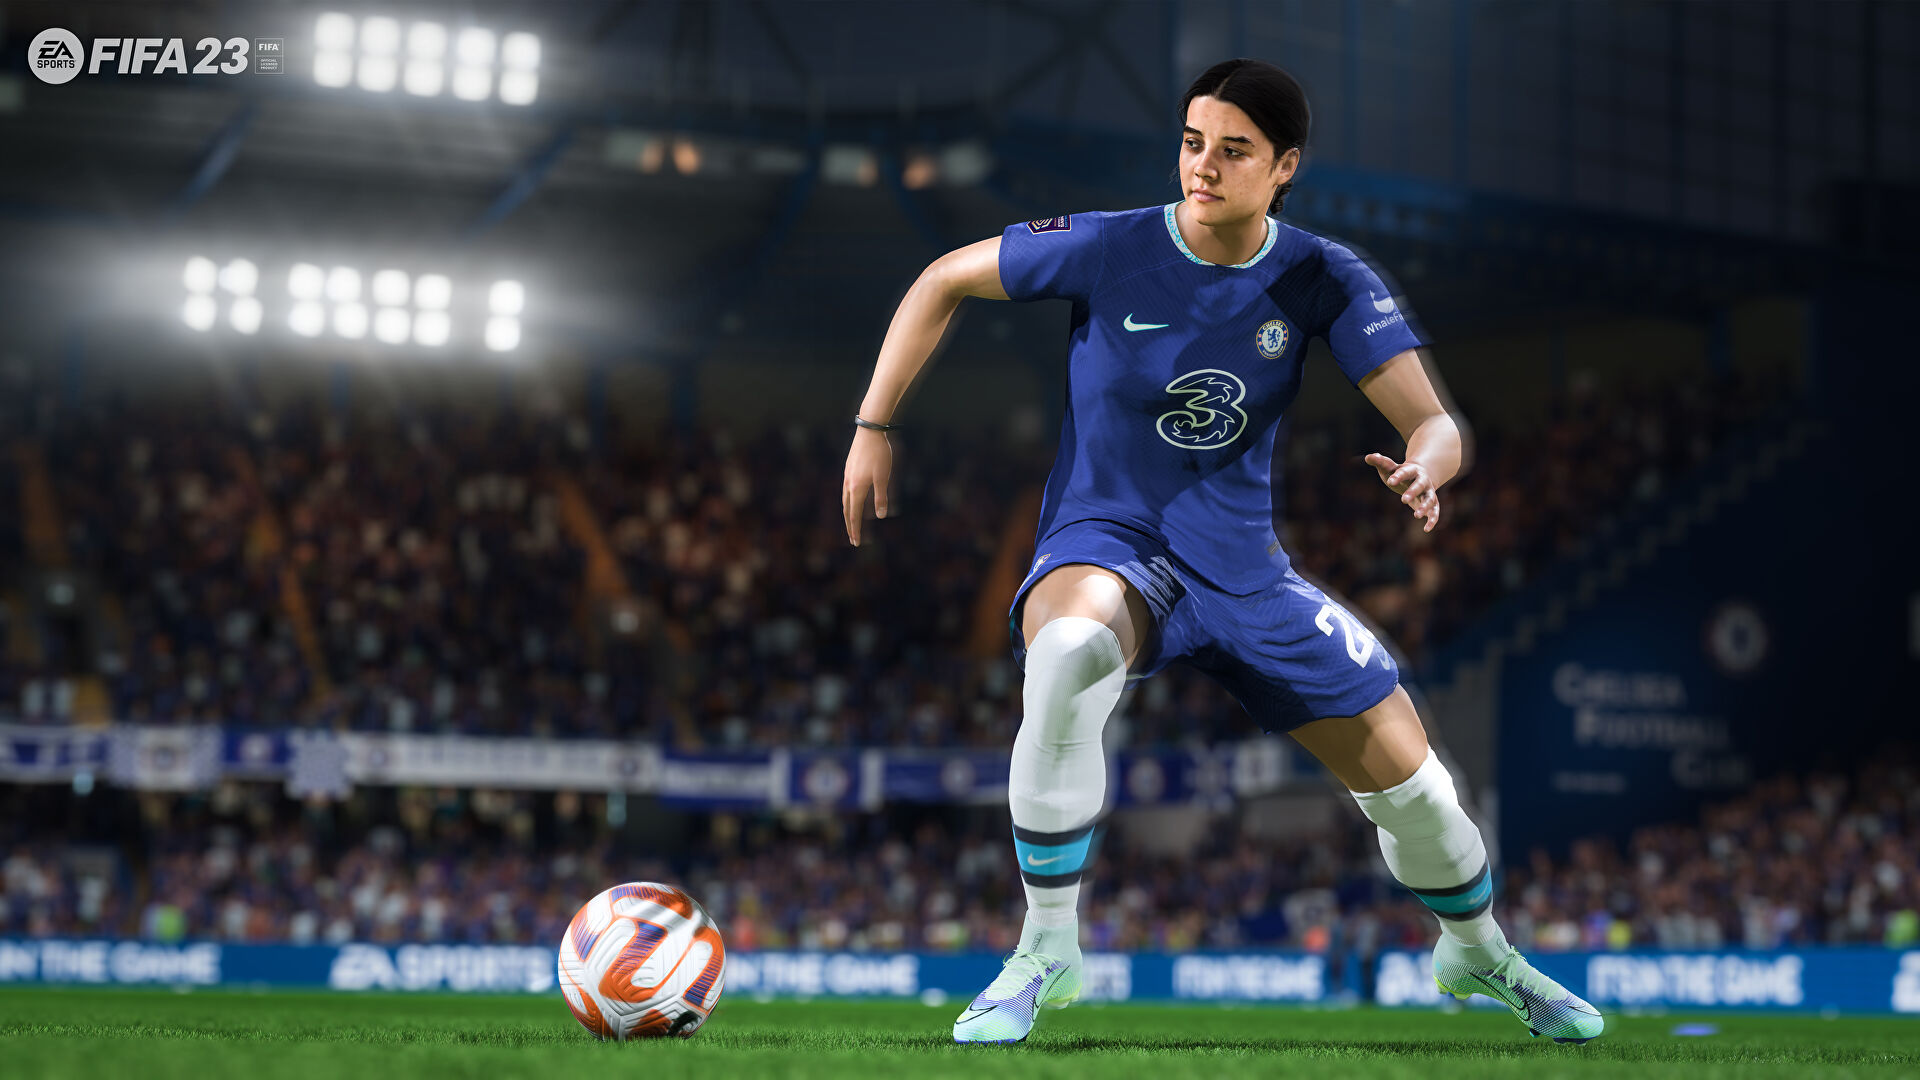 FIFA 23 attracted over 10 million players within the first week